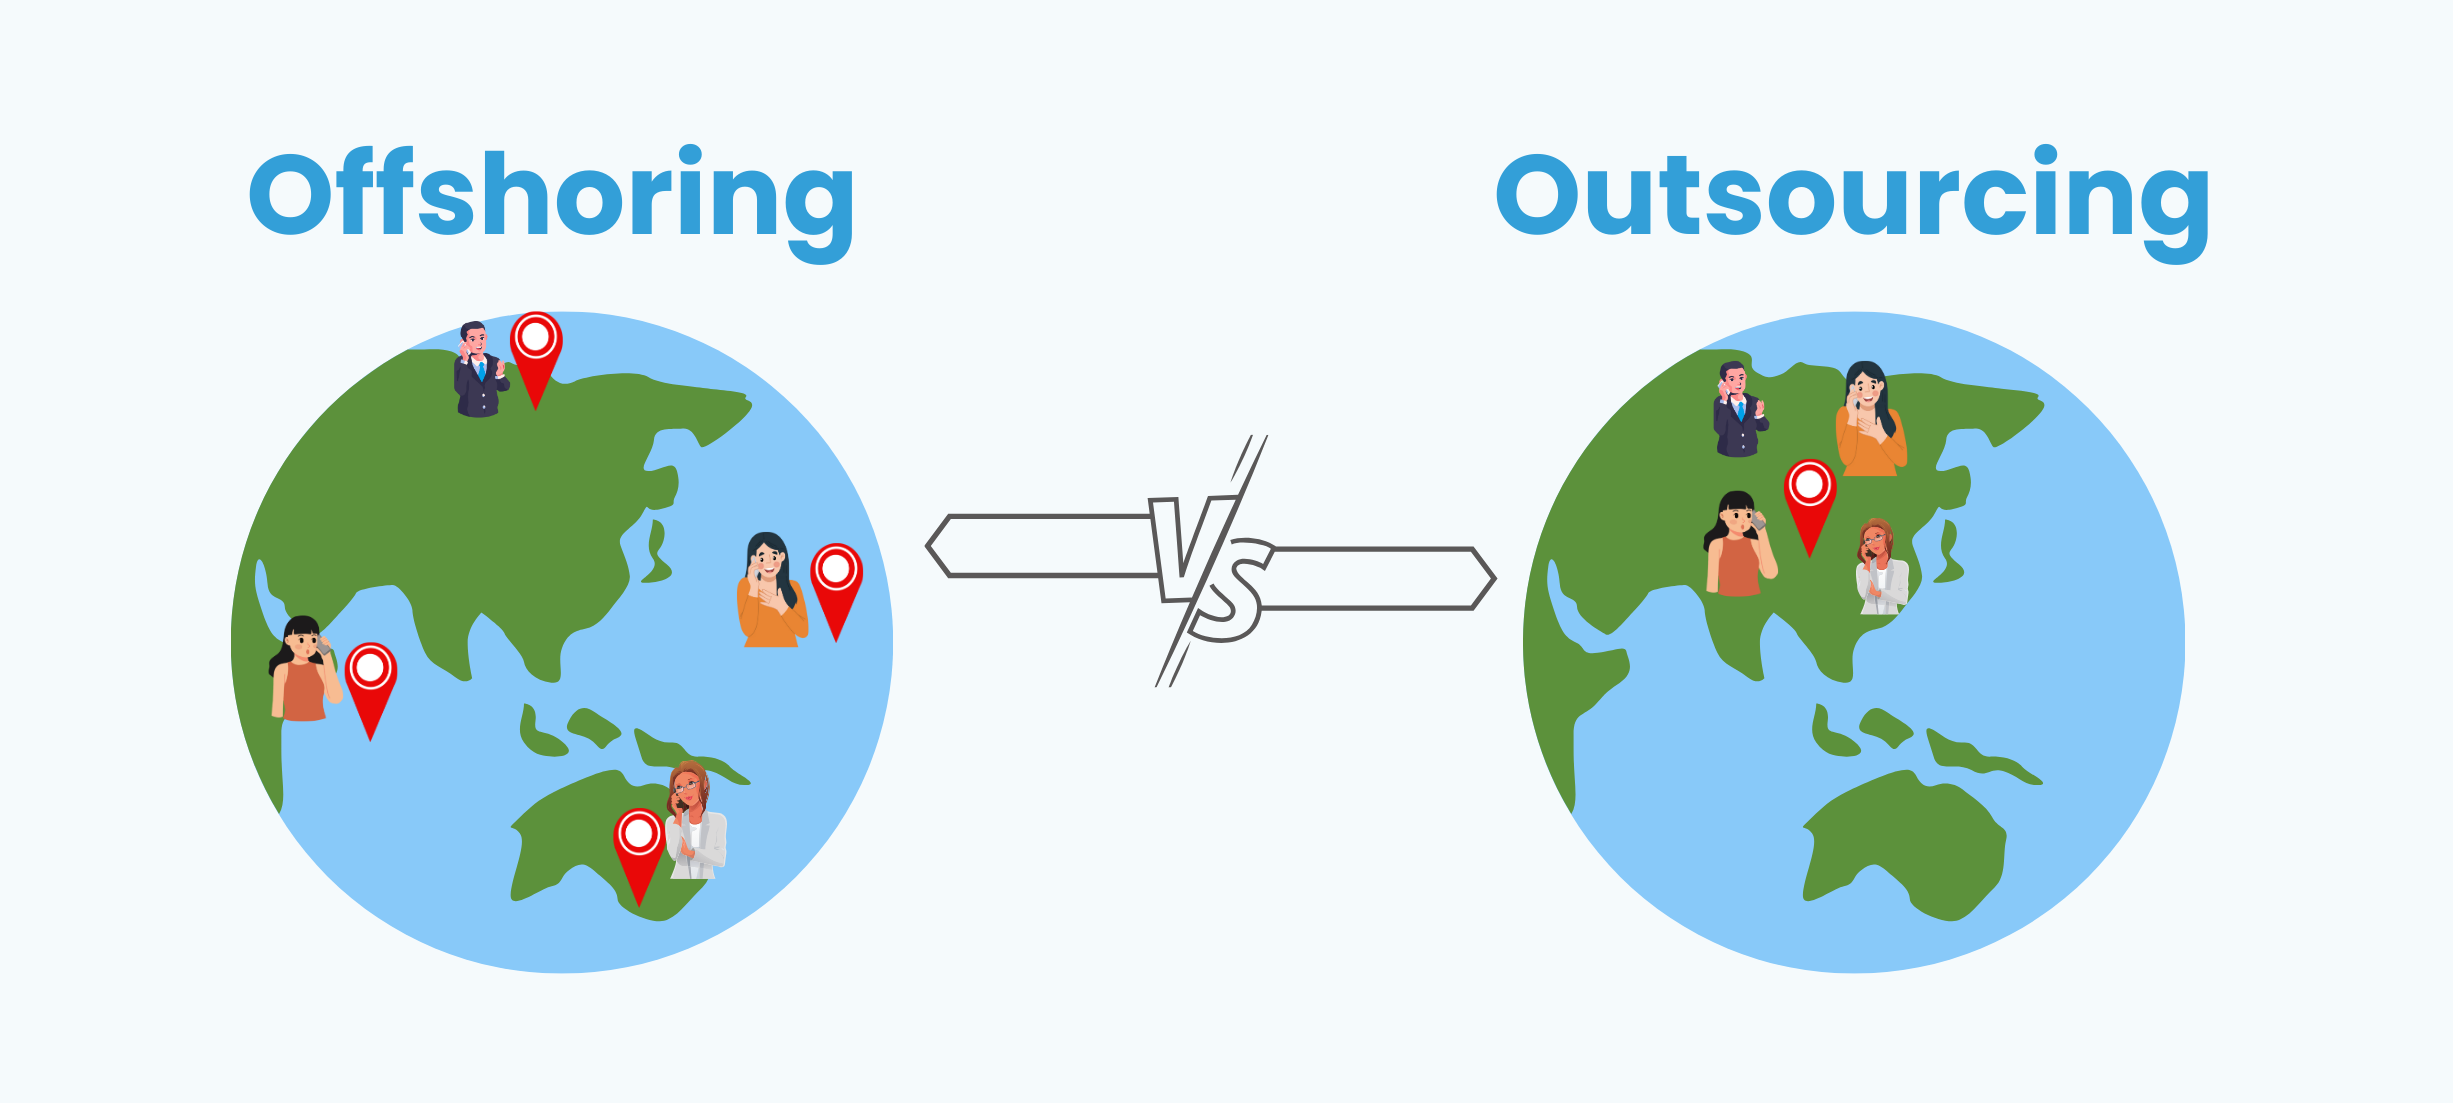 Difference between offshoring and outsourcing